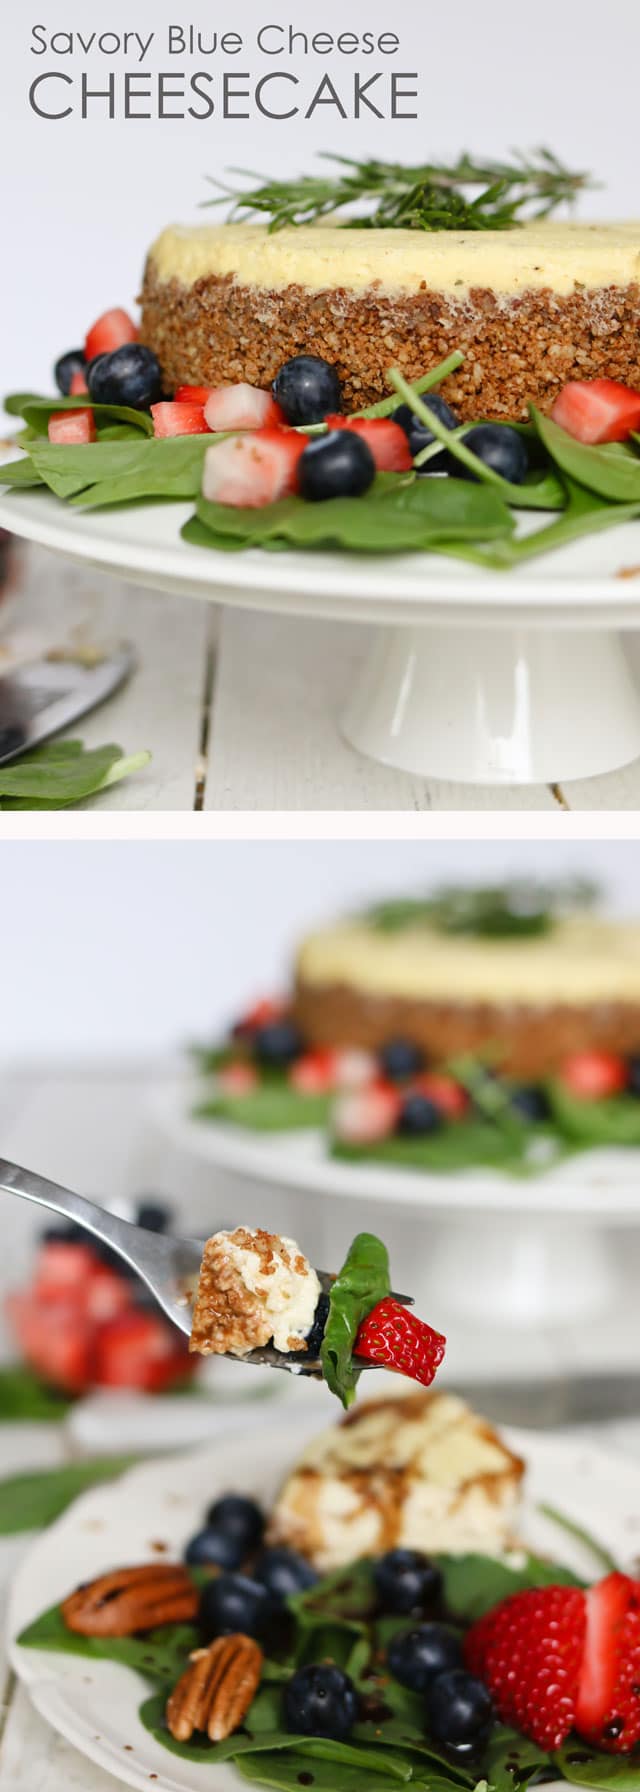 titled photo collage - Savory Blue Cheese Cheesecake 